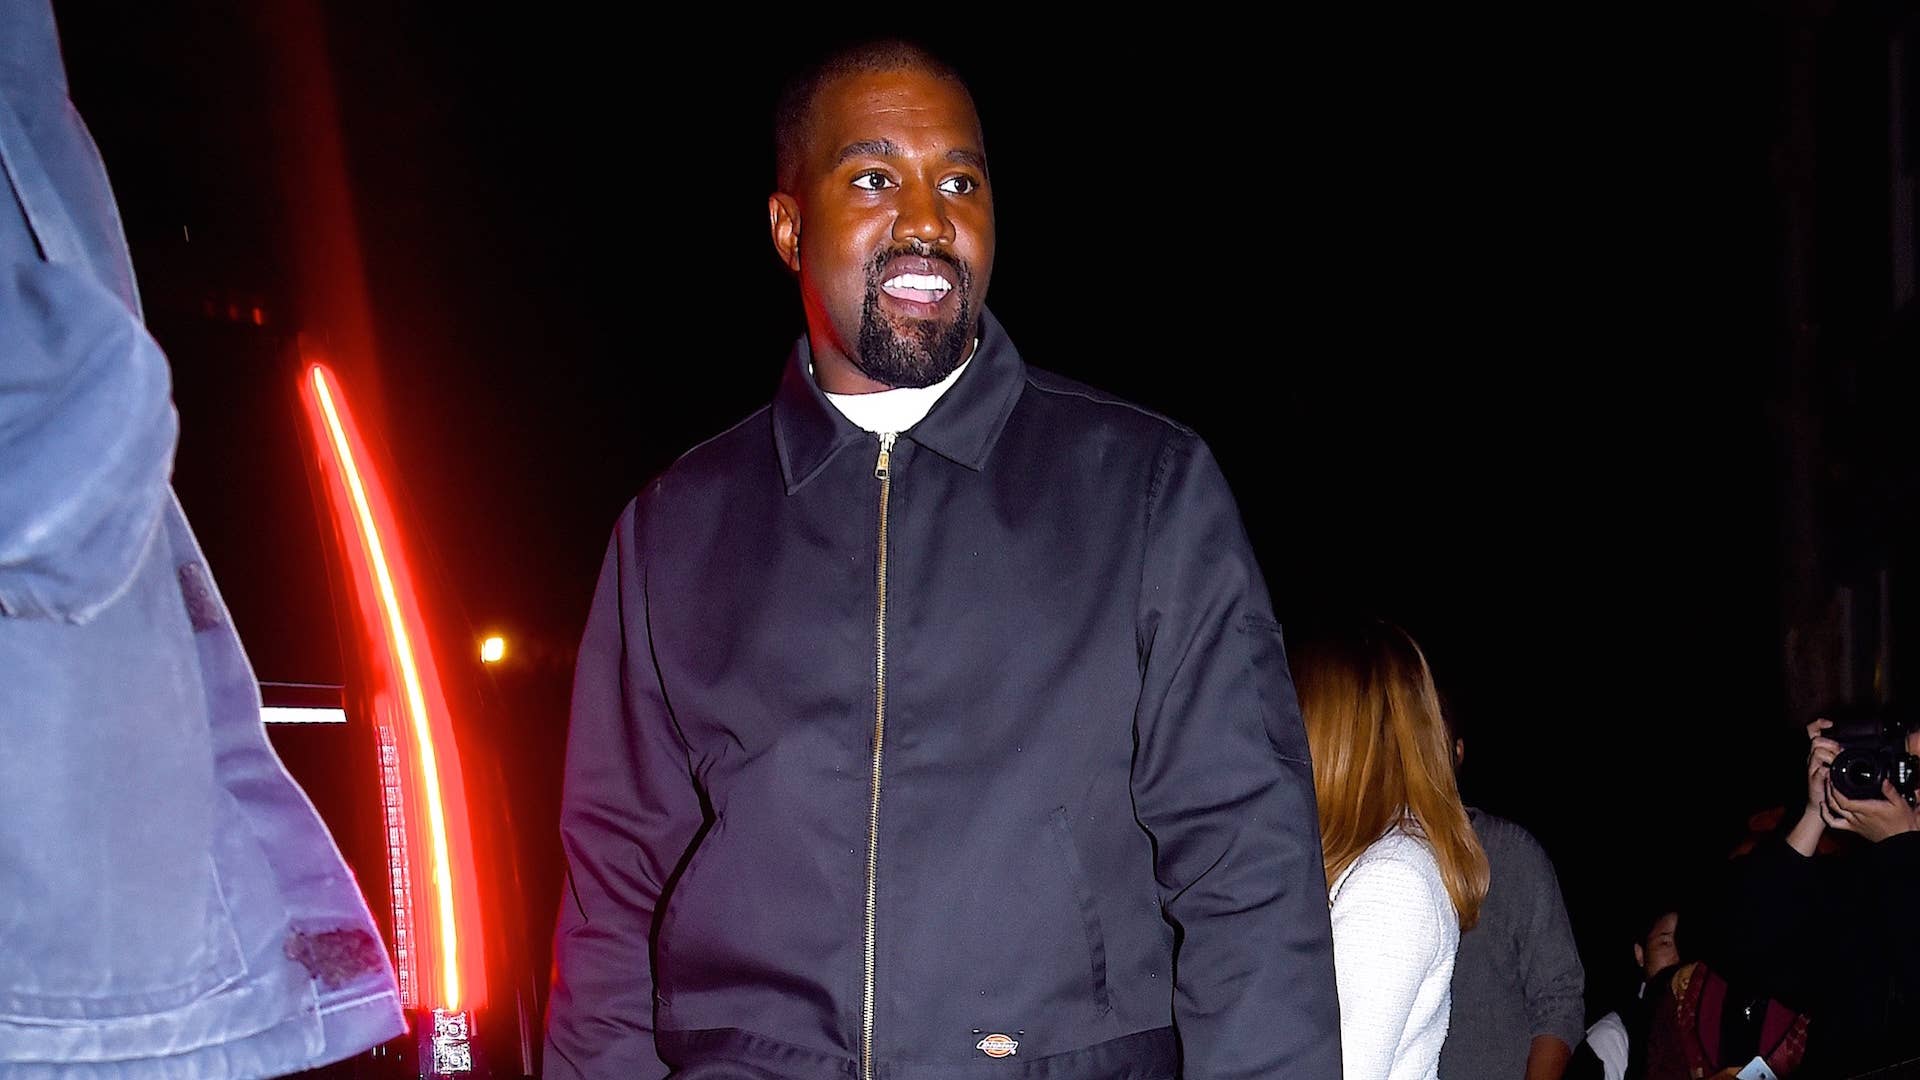 Kanye West's new album Donda 2 will be only be available